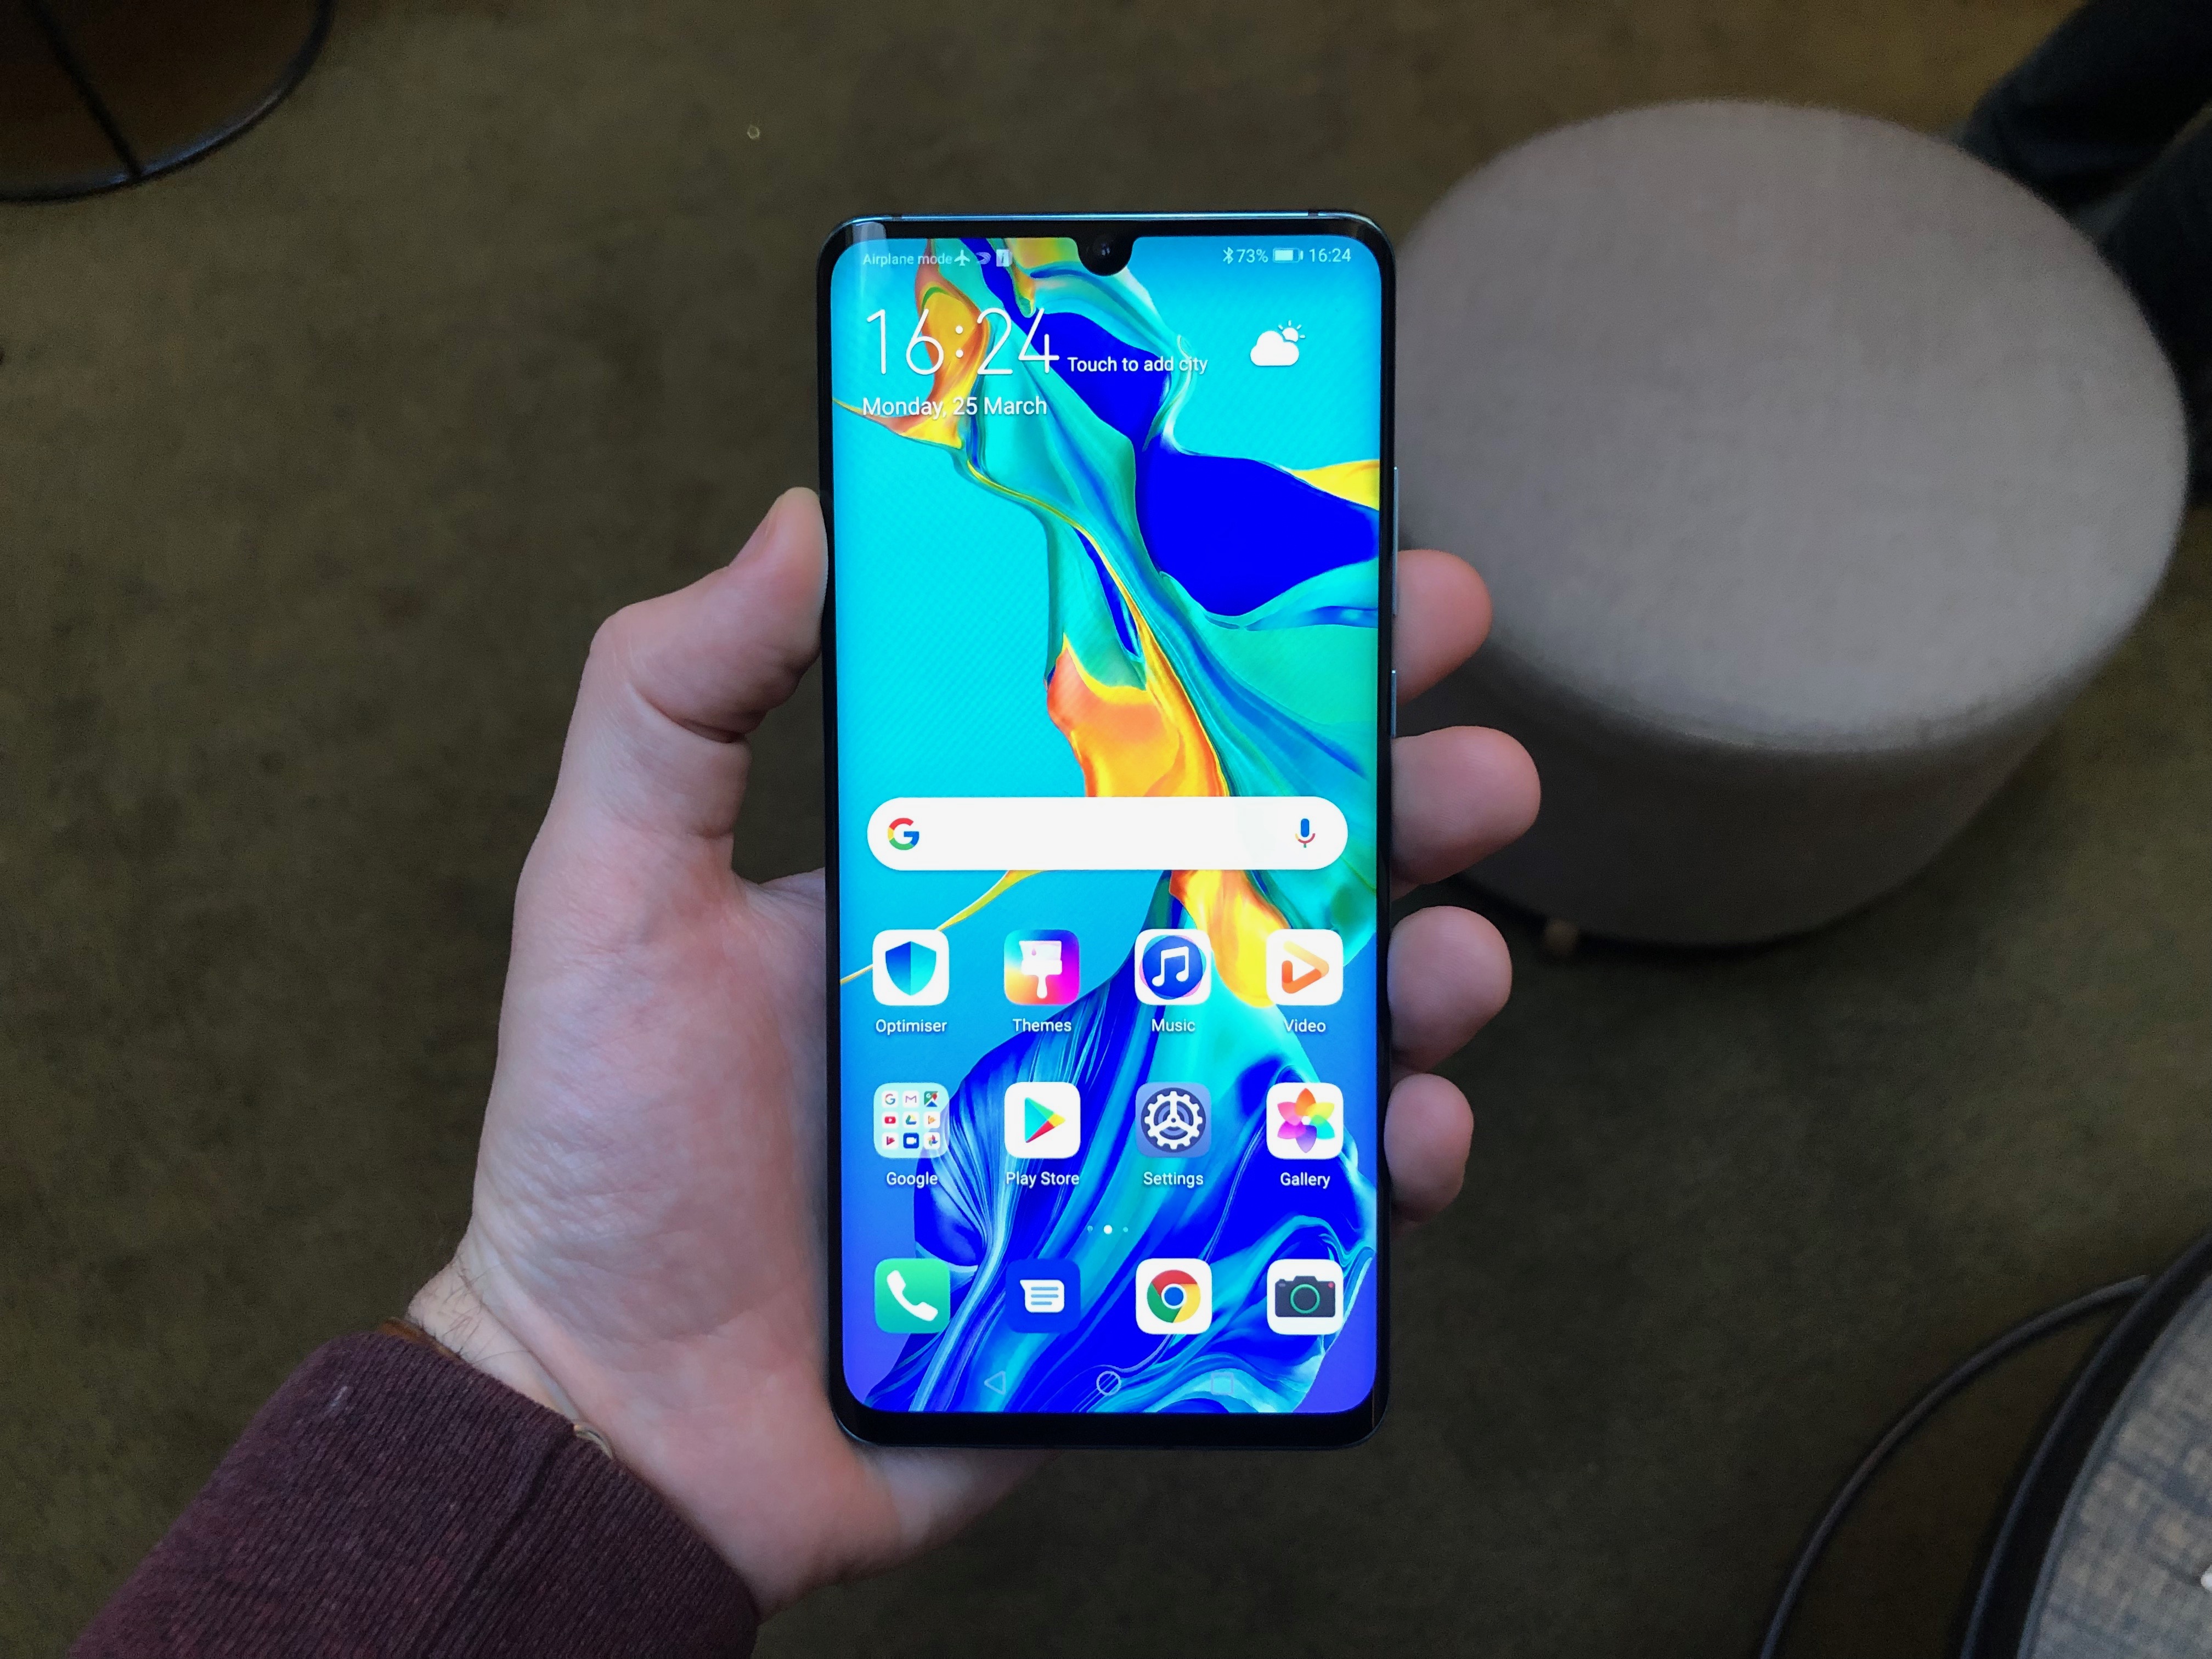 Even months after its release, the Huawei P30 Pro remains a smartphone triumph